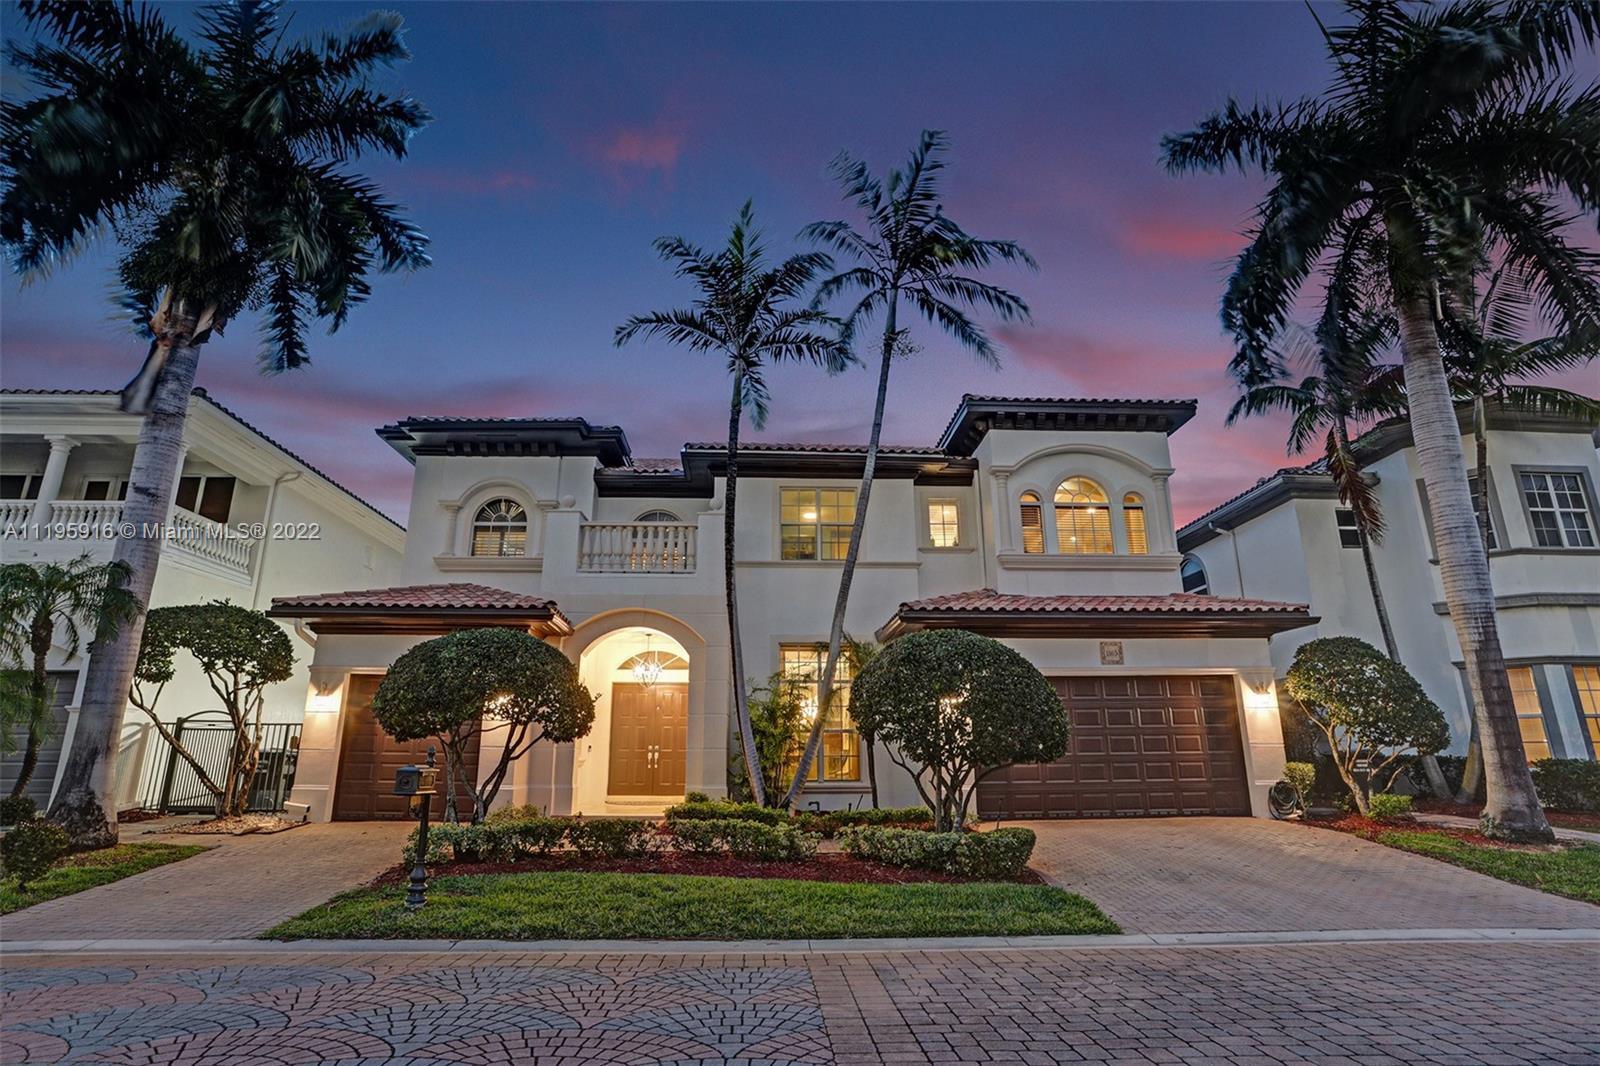 Stunning estate located in the private resort community of Harbor Island.  Located directly on intra